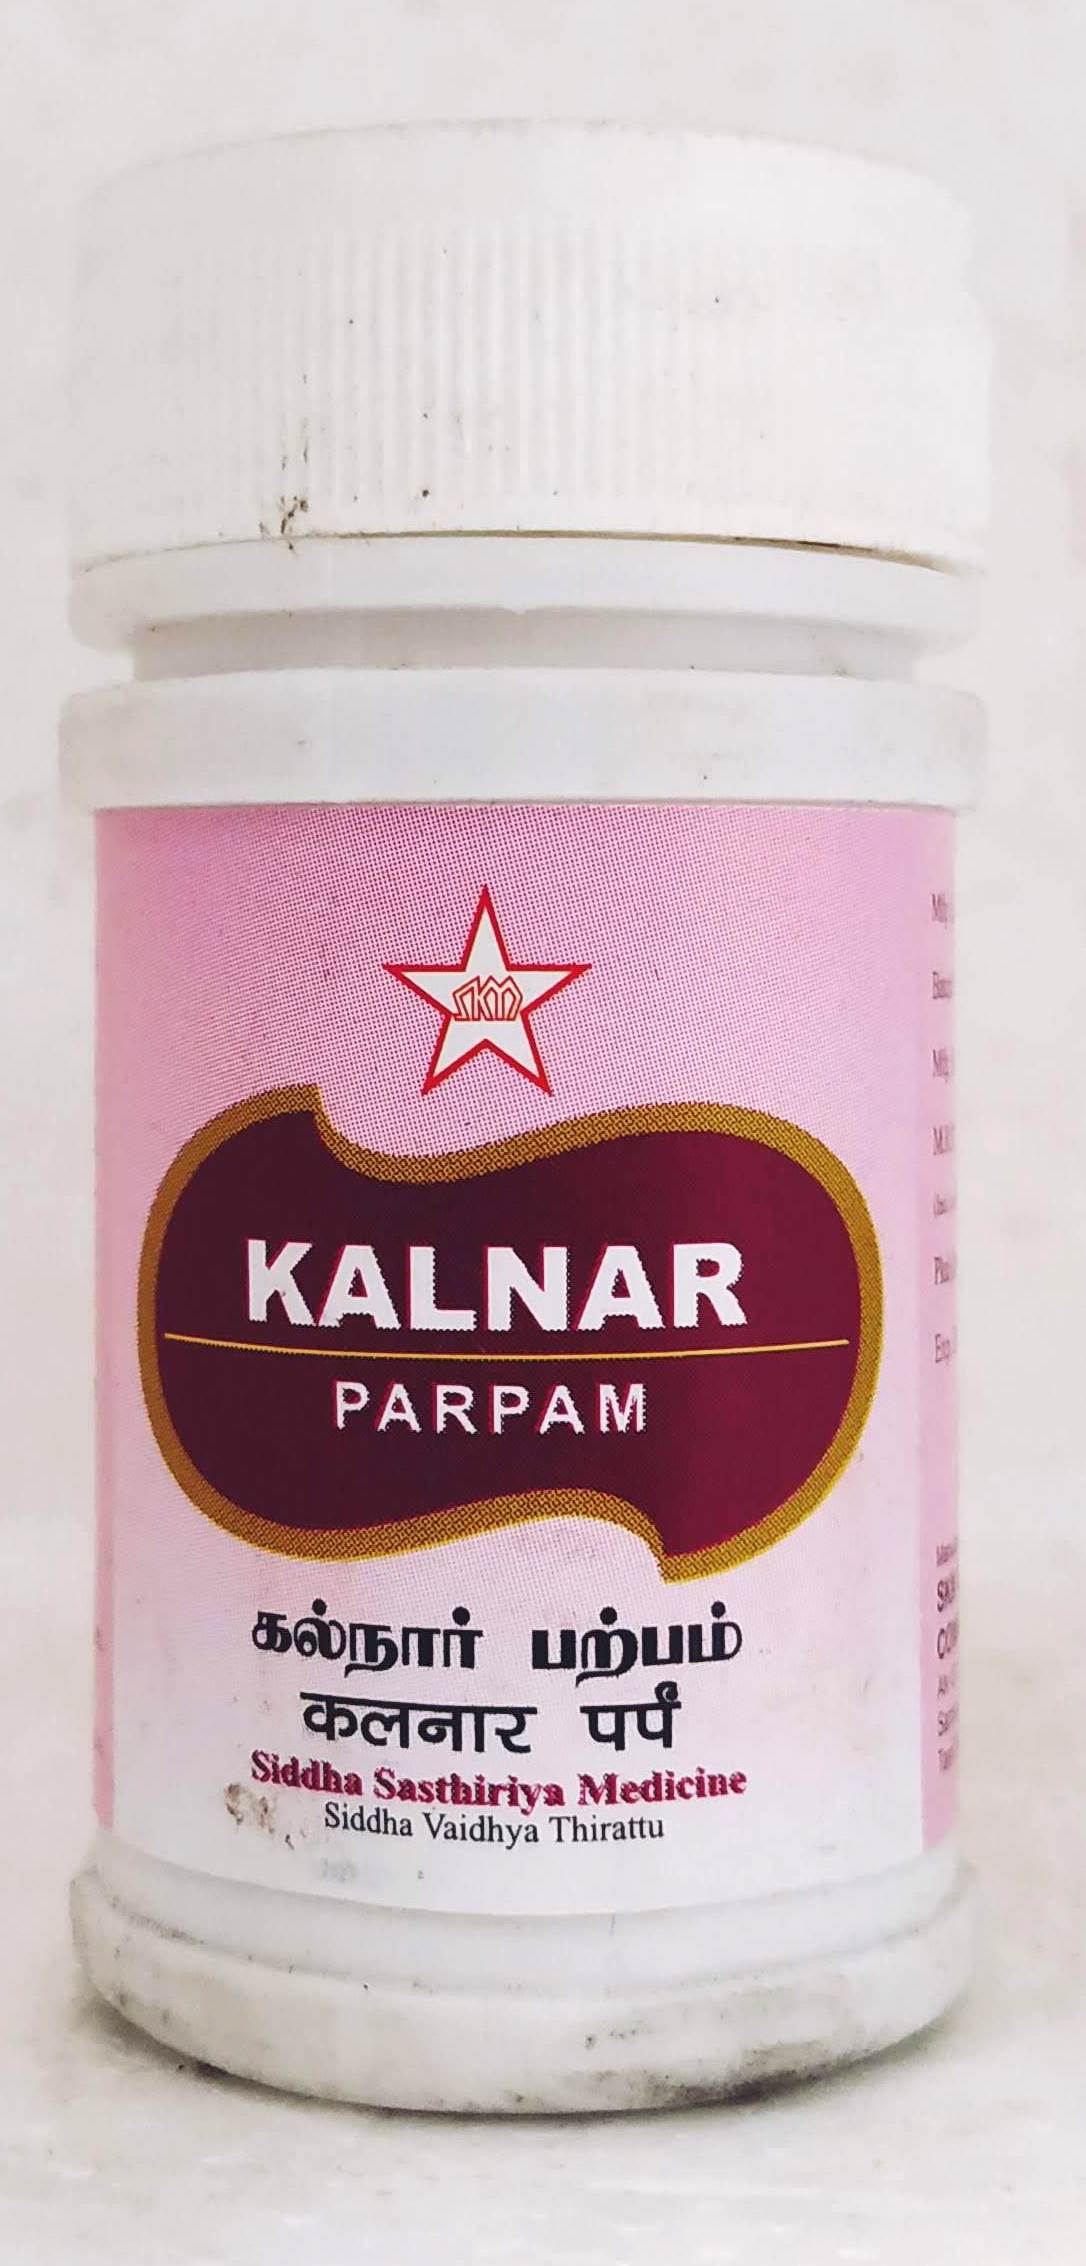 Shop Kalnar Parpam 10gm at price 82.00 from SKM Online - Ayush Care